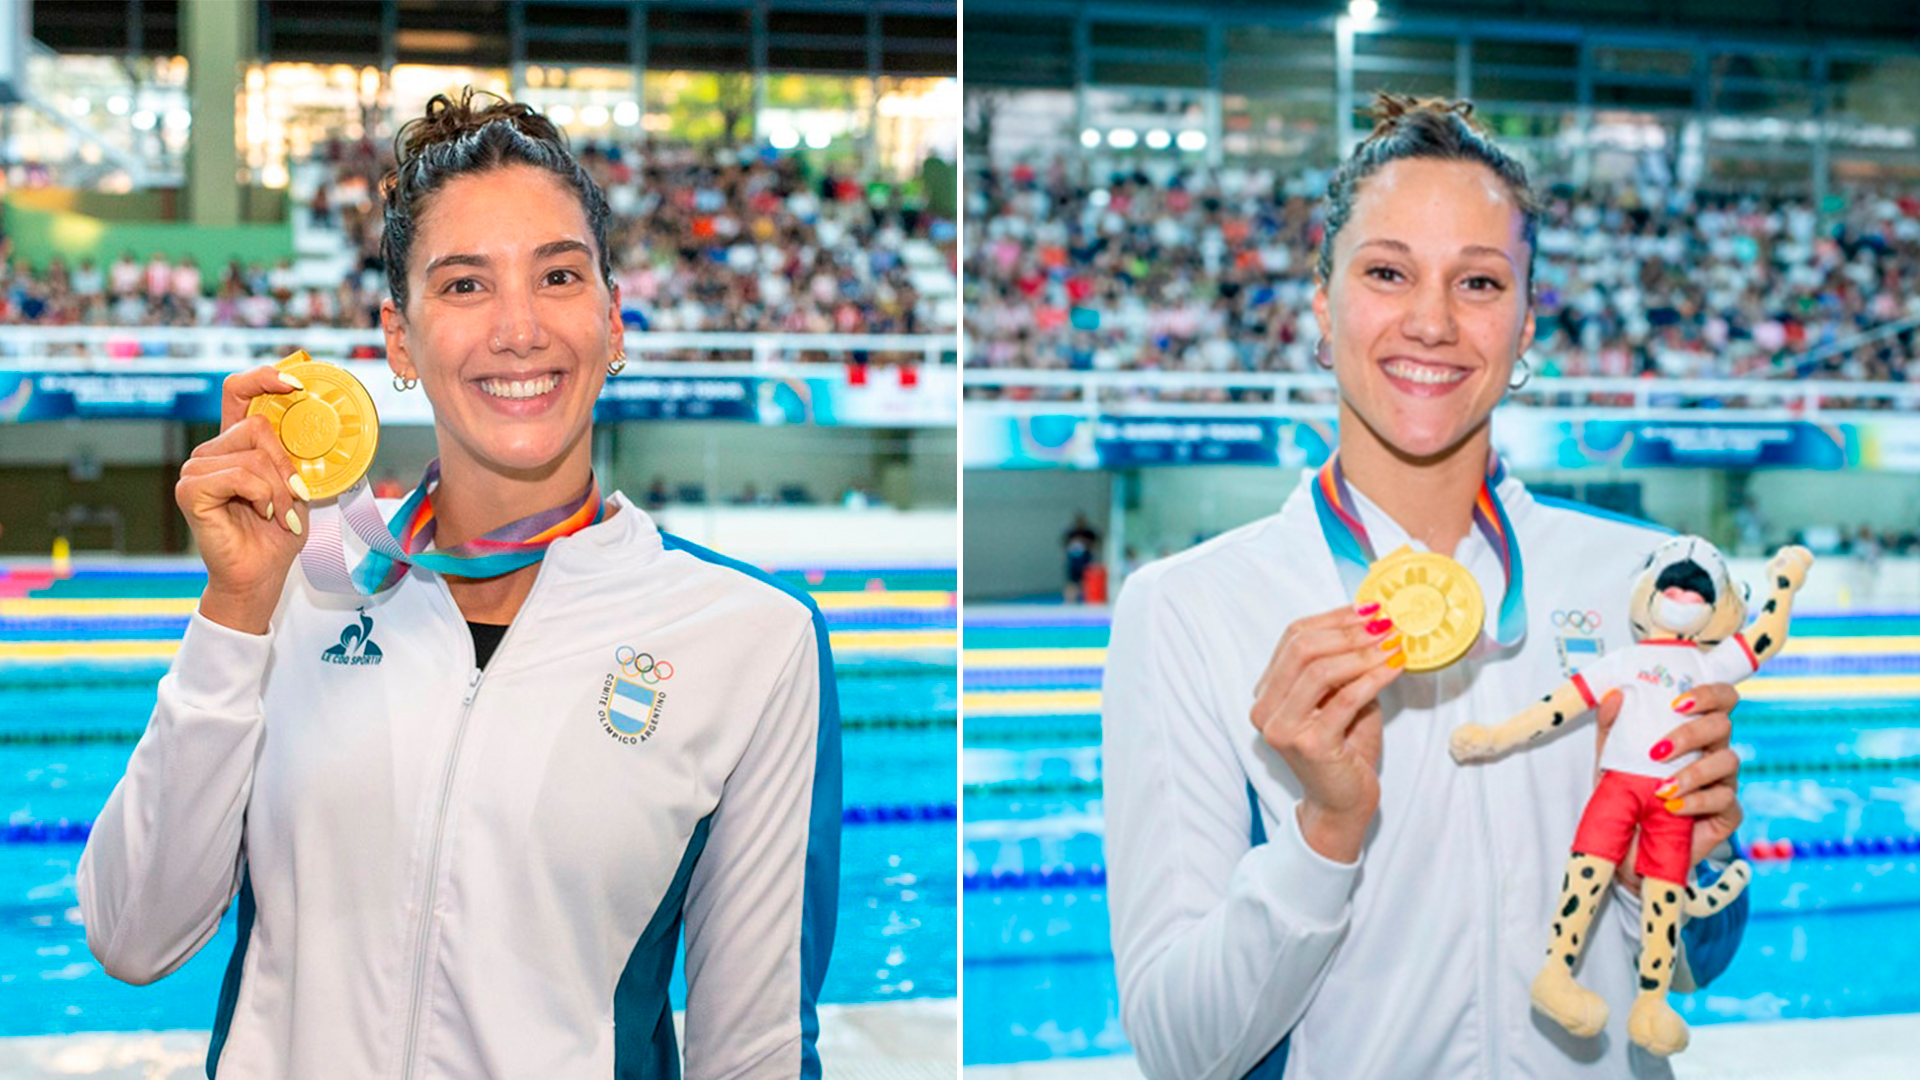 Swimming gold: Florencia Perotti over 400 meters combined and Andrea Berrino over 100 meters back (@PrensaCOA)